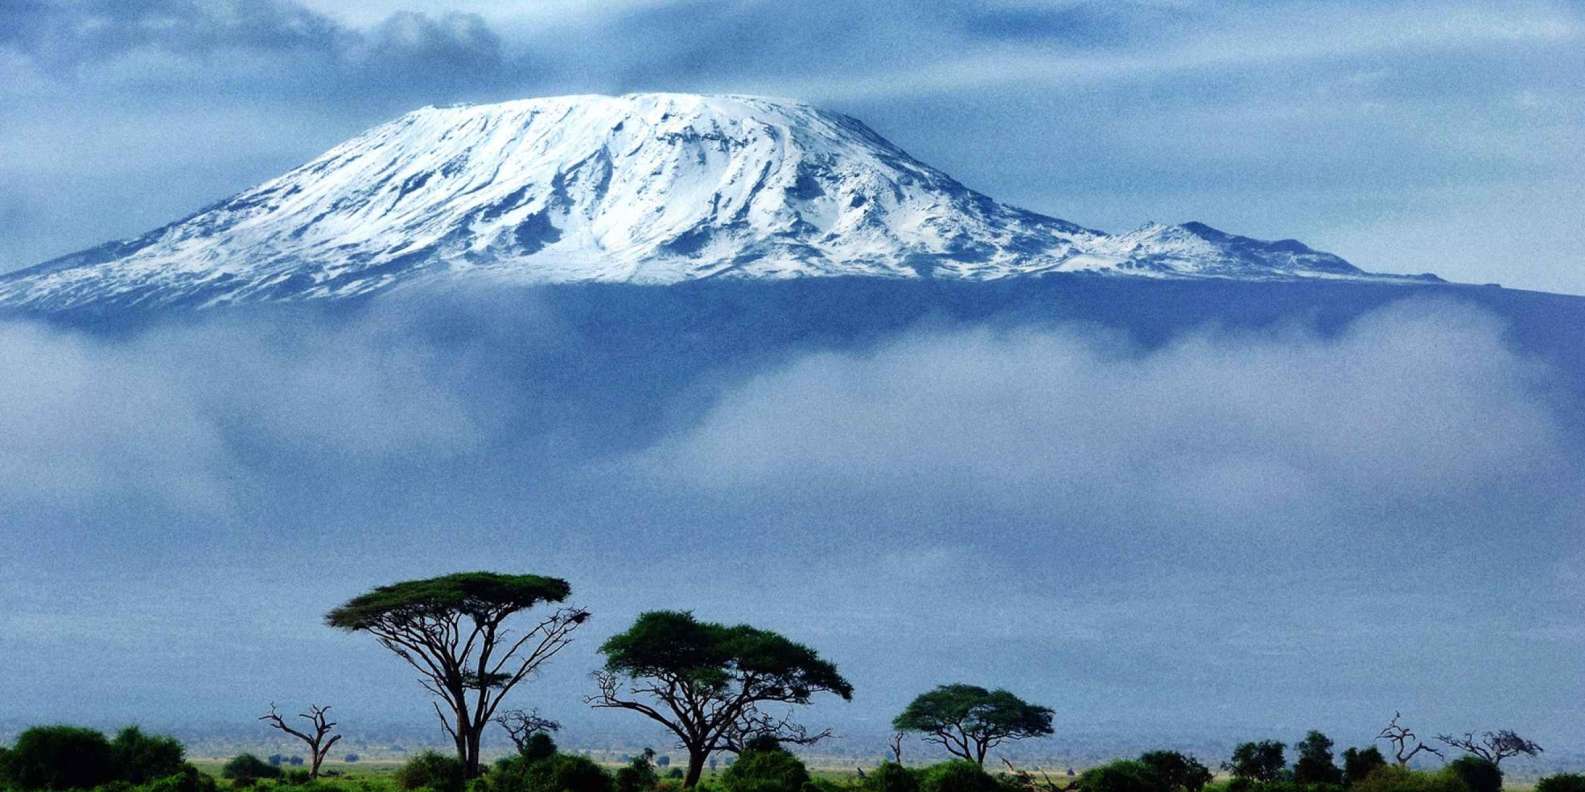 Image Slider No: 1 Kilimanjaro Routes - Which one is Best Kilimanjaro Route?